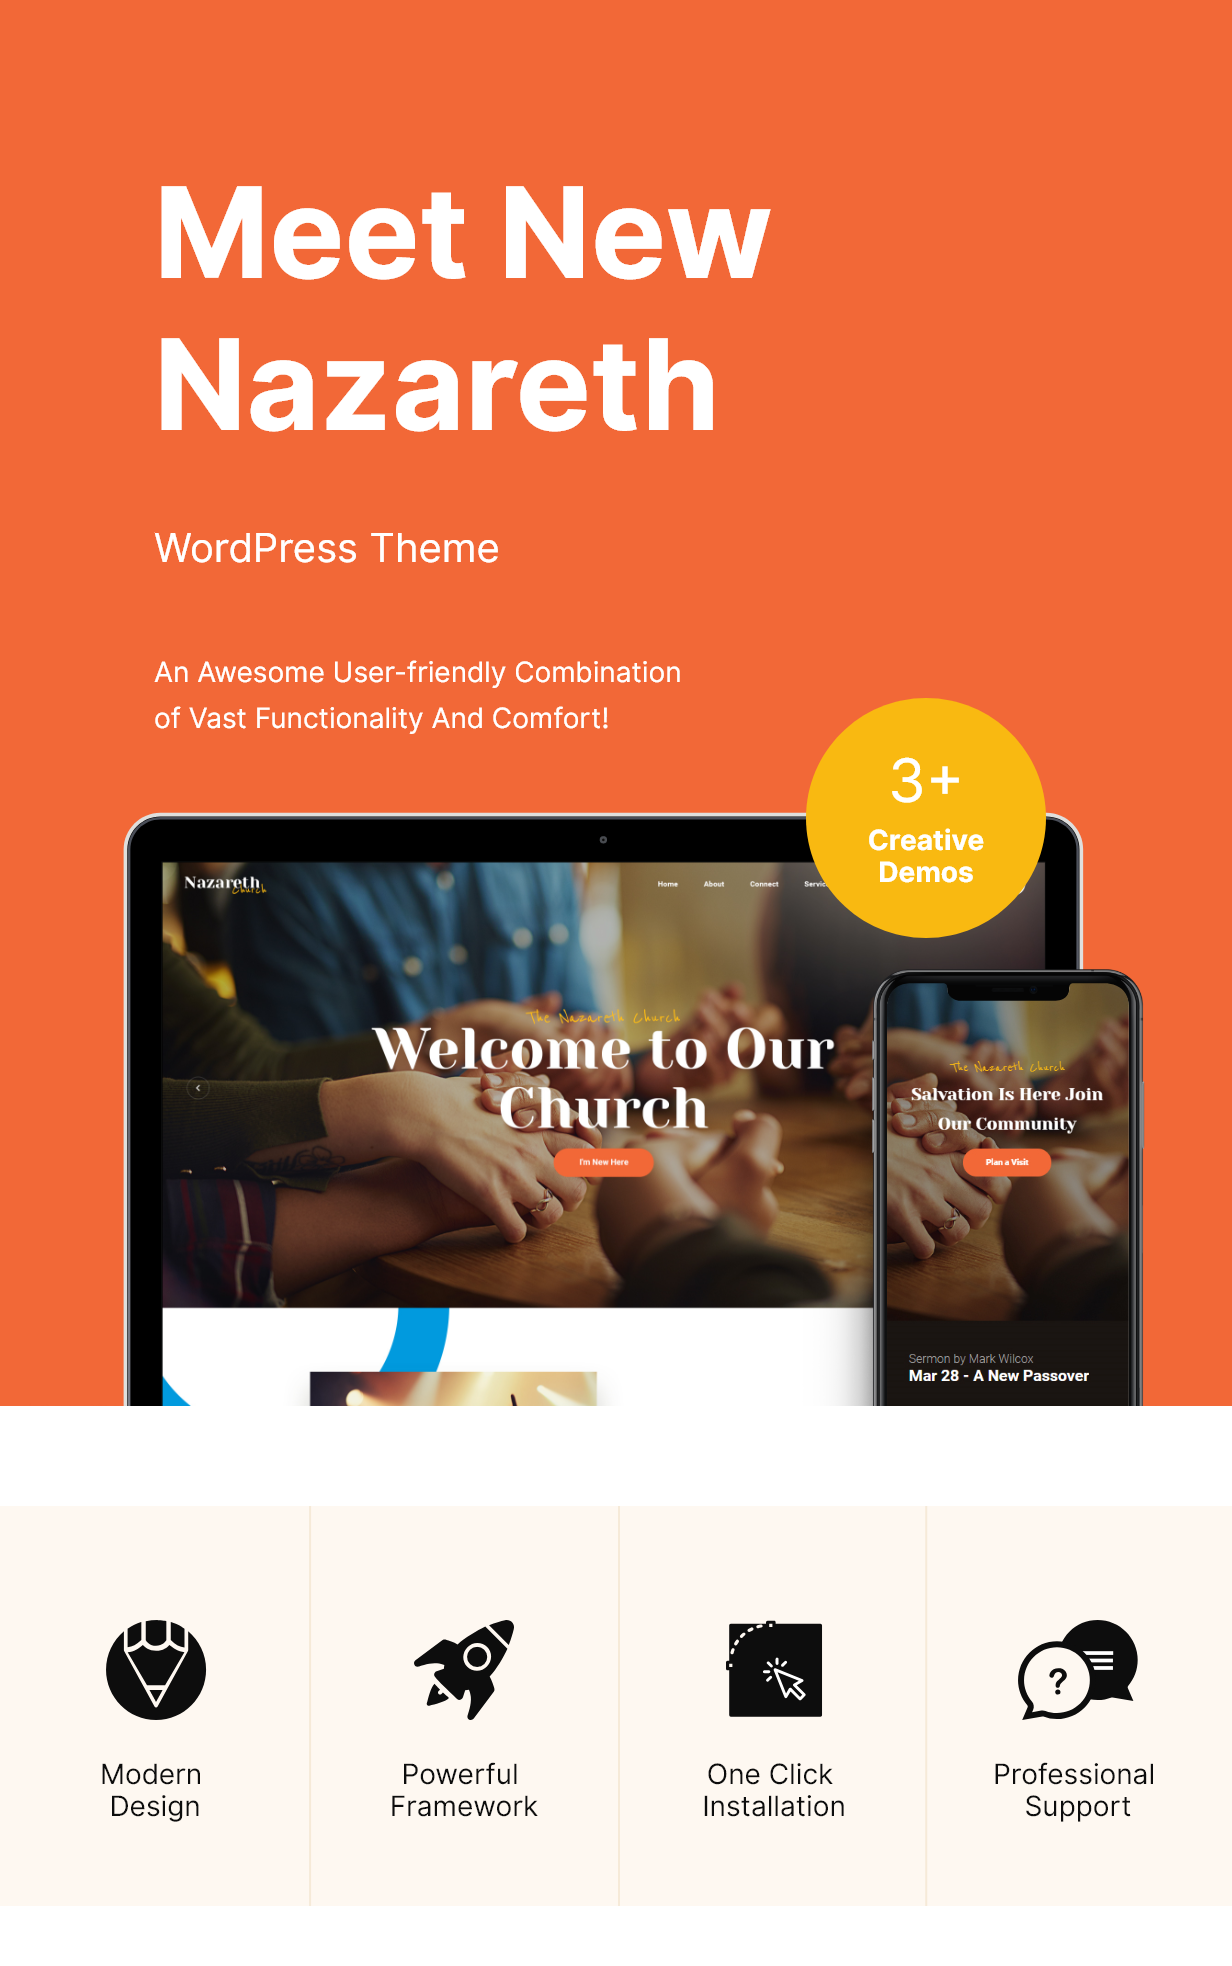 Mockups of Iphone and Macbook with templates and white lettering "Meet New Nazareth".